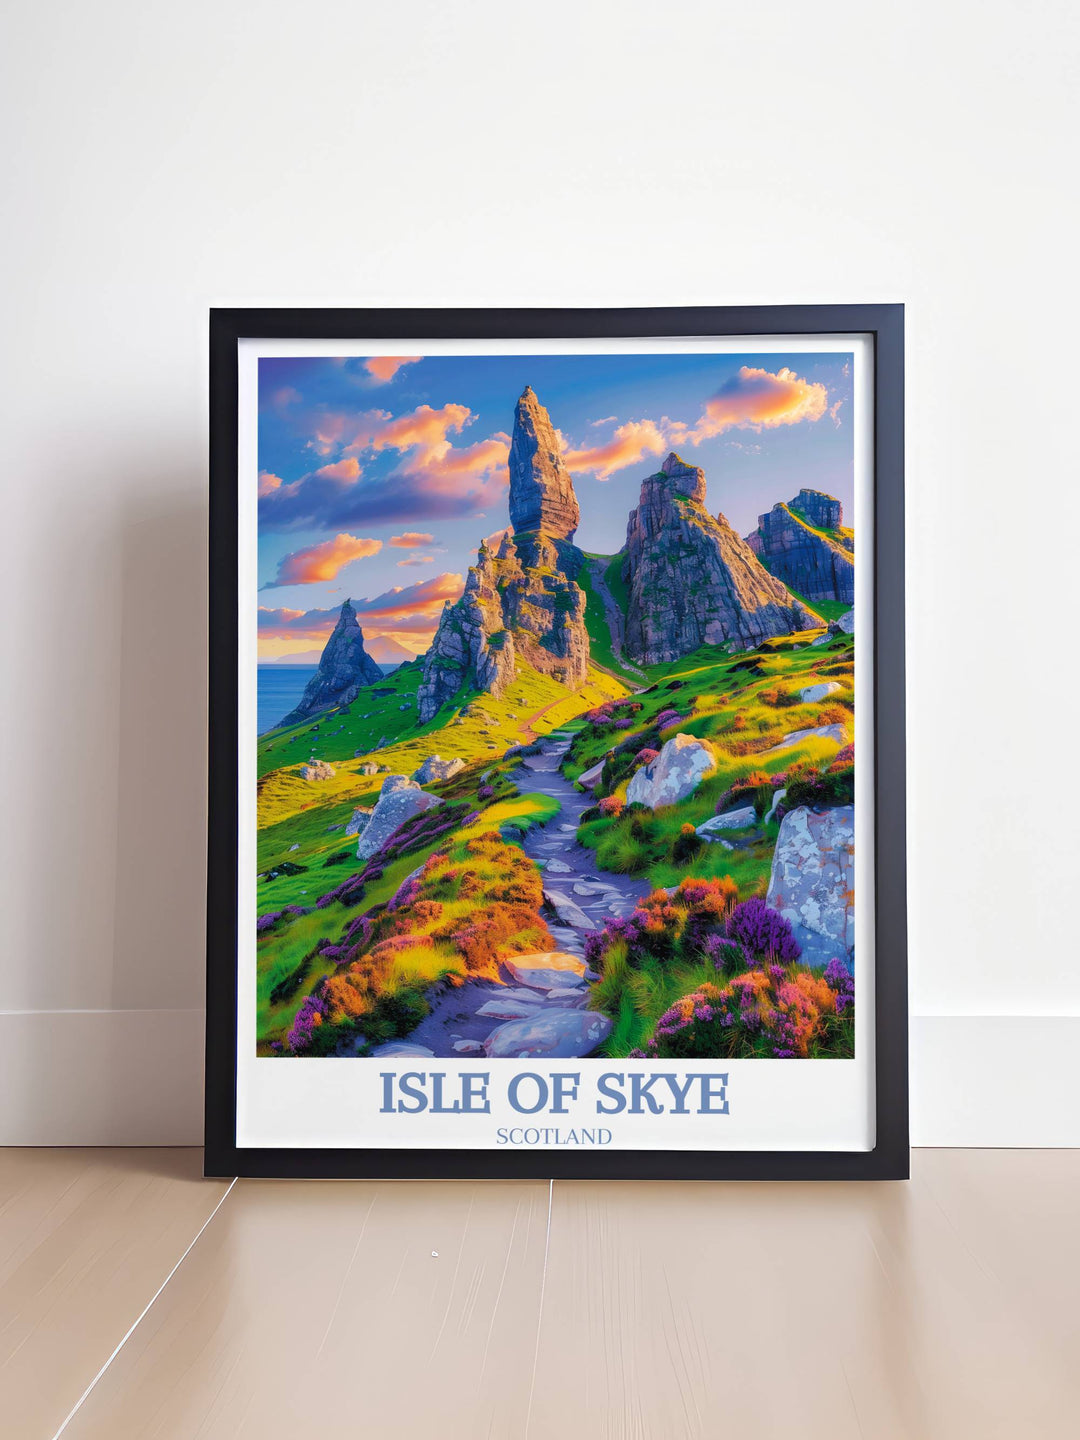 An artistic Isle of Skye poster featuring The Old Man of Storr in vivid colors, ideal for enhancing travel-themed or contemporary interiors.